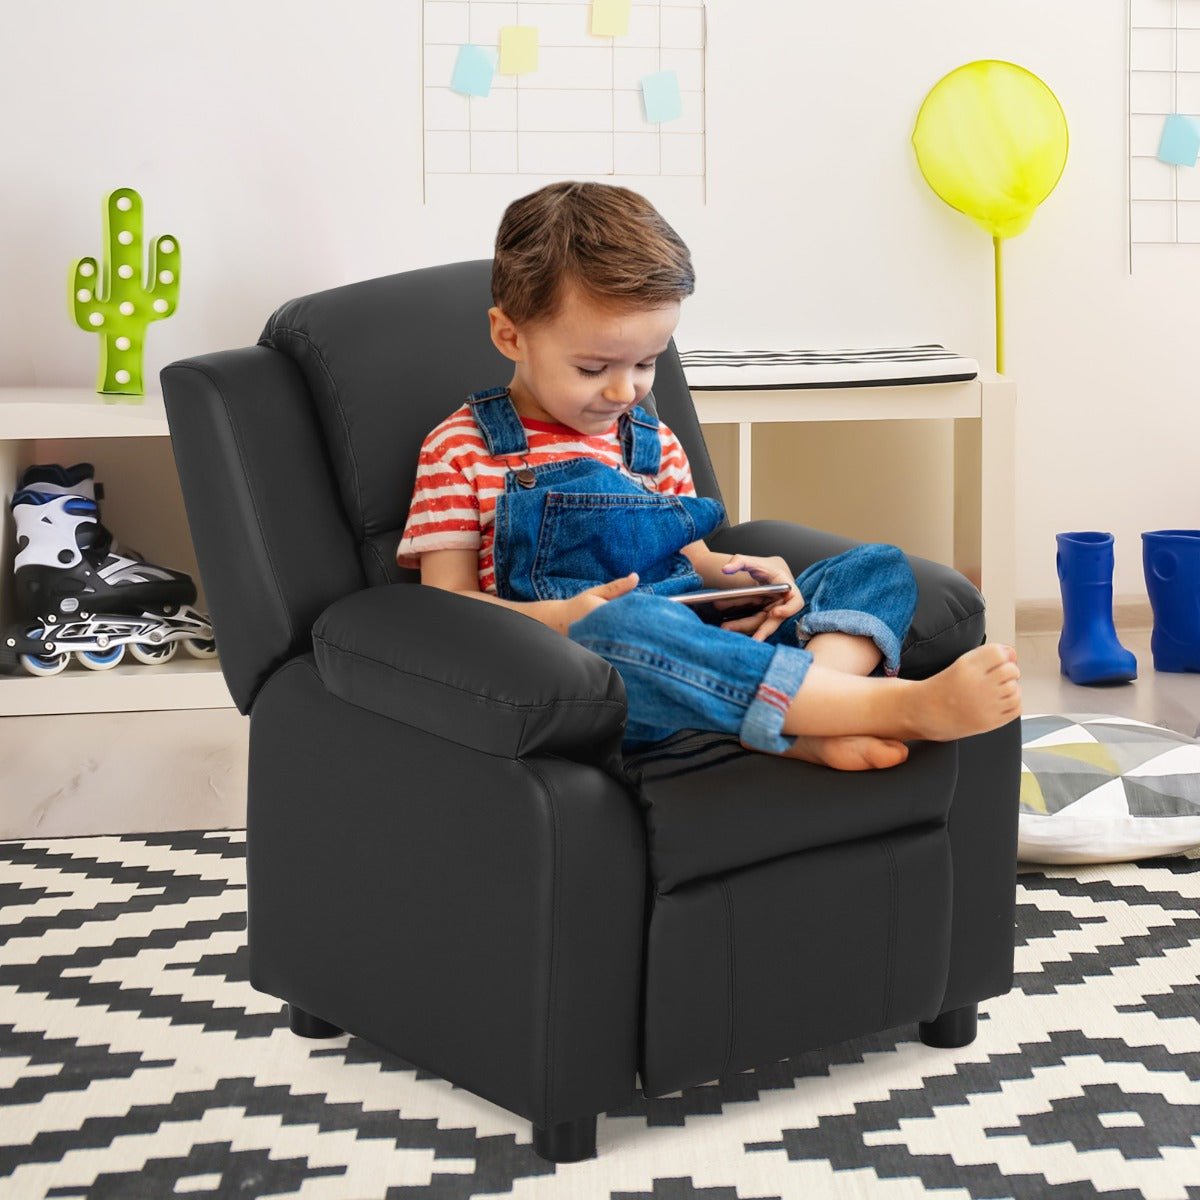 Kid Lounge Sofa: Upholstered with Easy-Clean PU Cover - Playroom Oasis